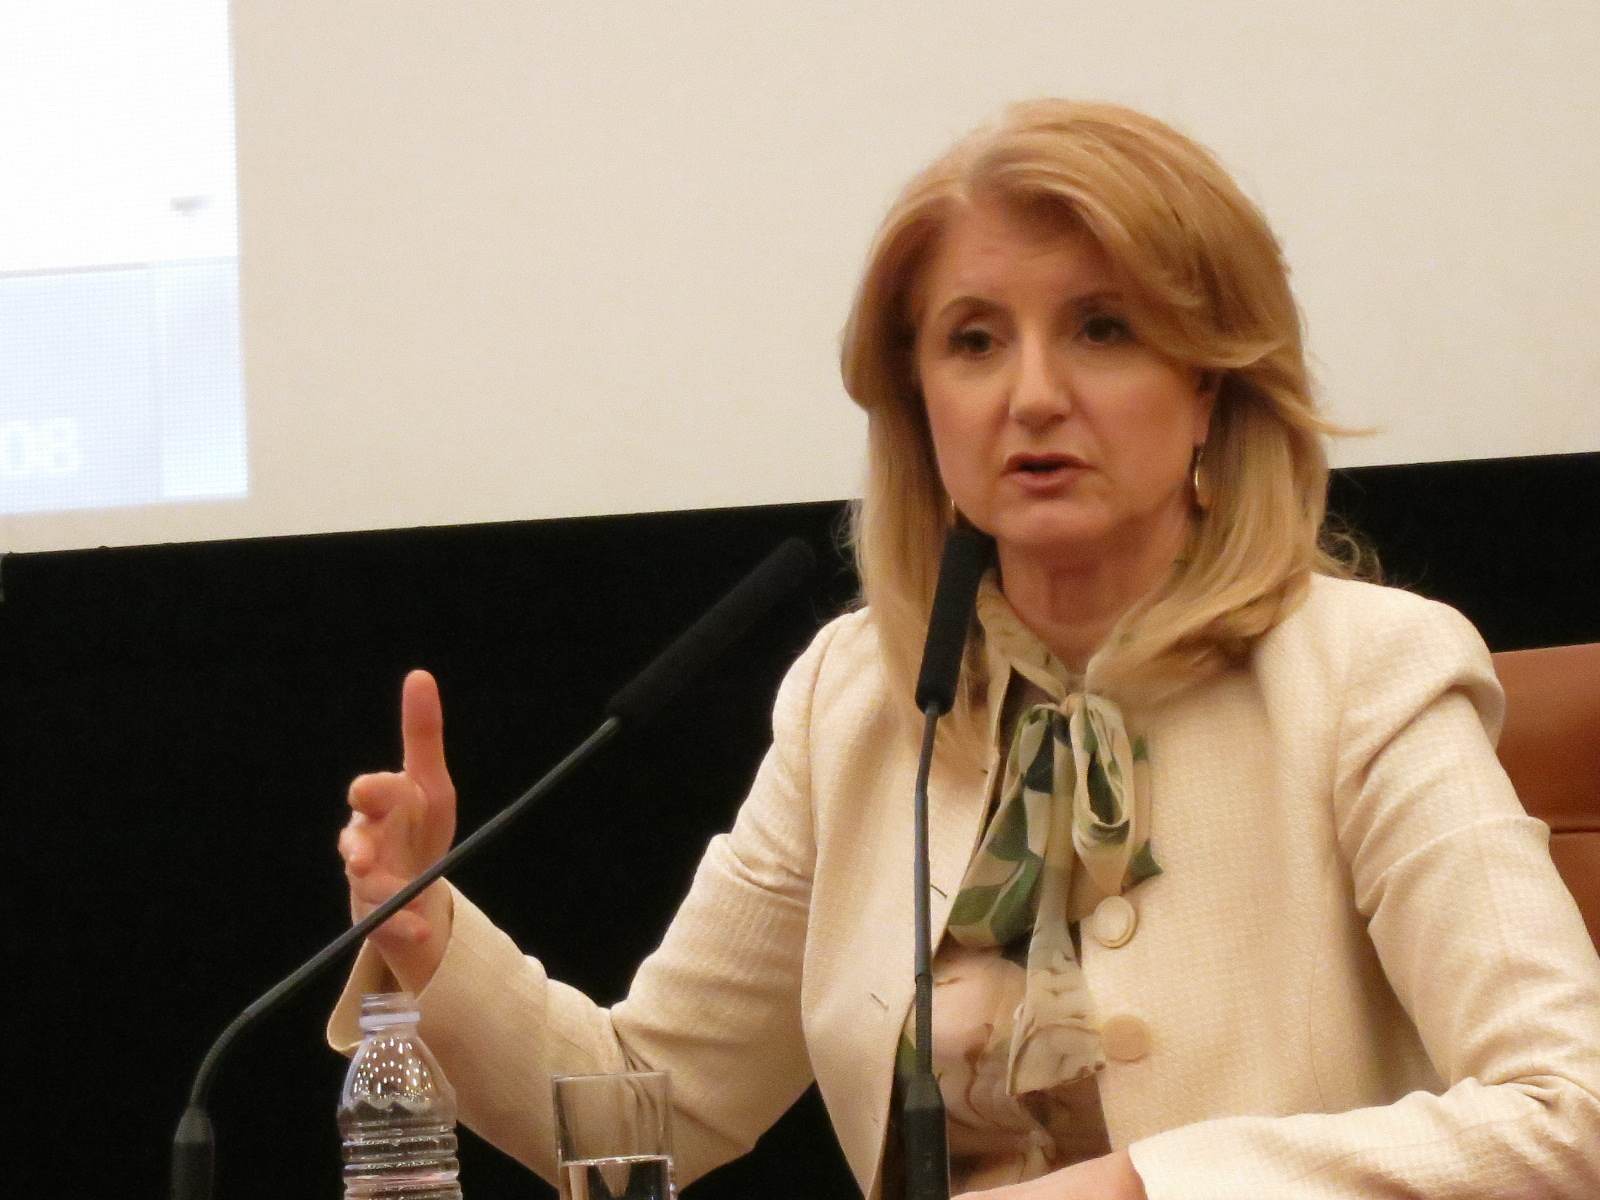 Internet mogul: Arianna Huffington, president and editor-in-chief of the Huffington Post Media Group, holds a news conference at the Japan National Press Club in Tokyo on Wednesday. | KAZUAKI NAGATA